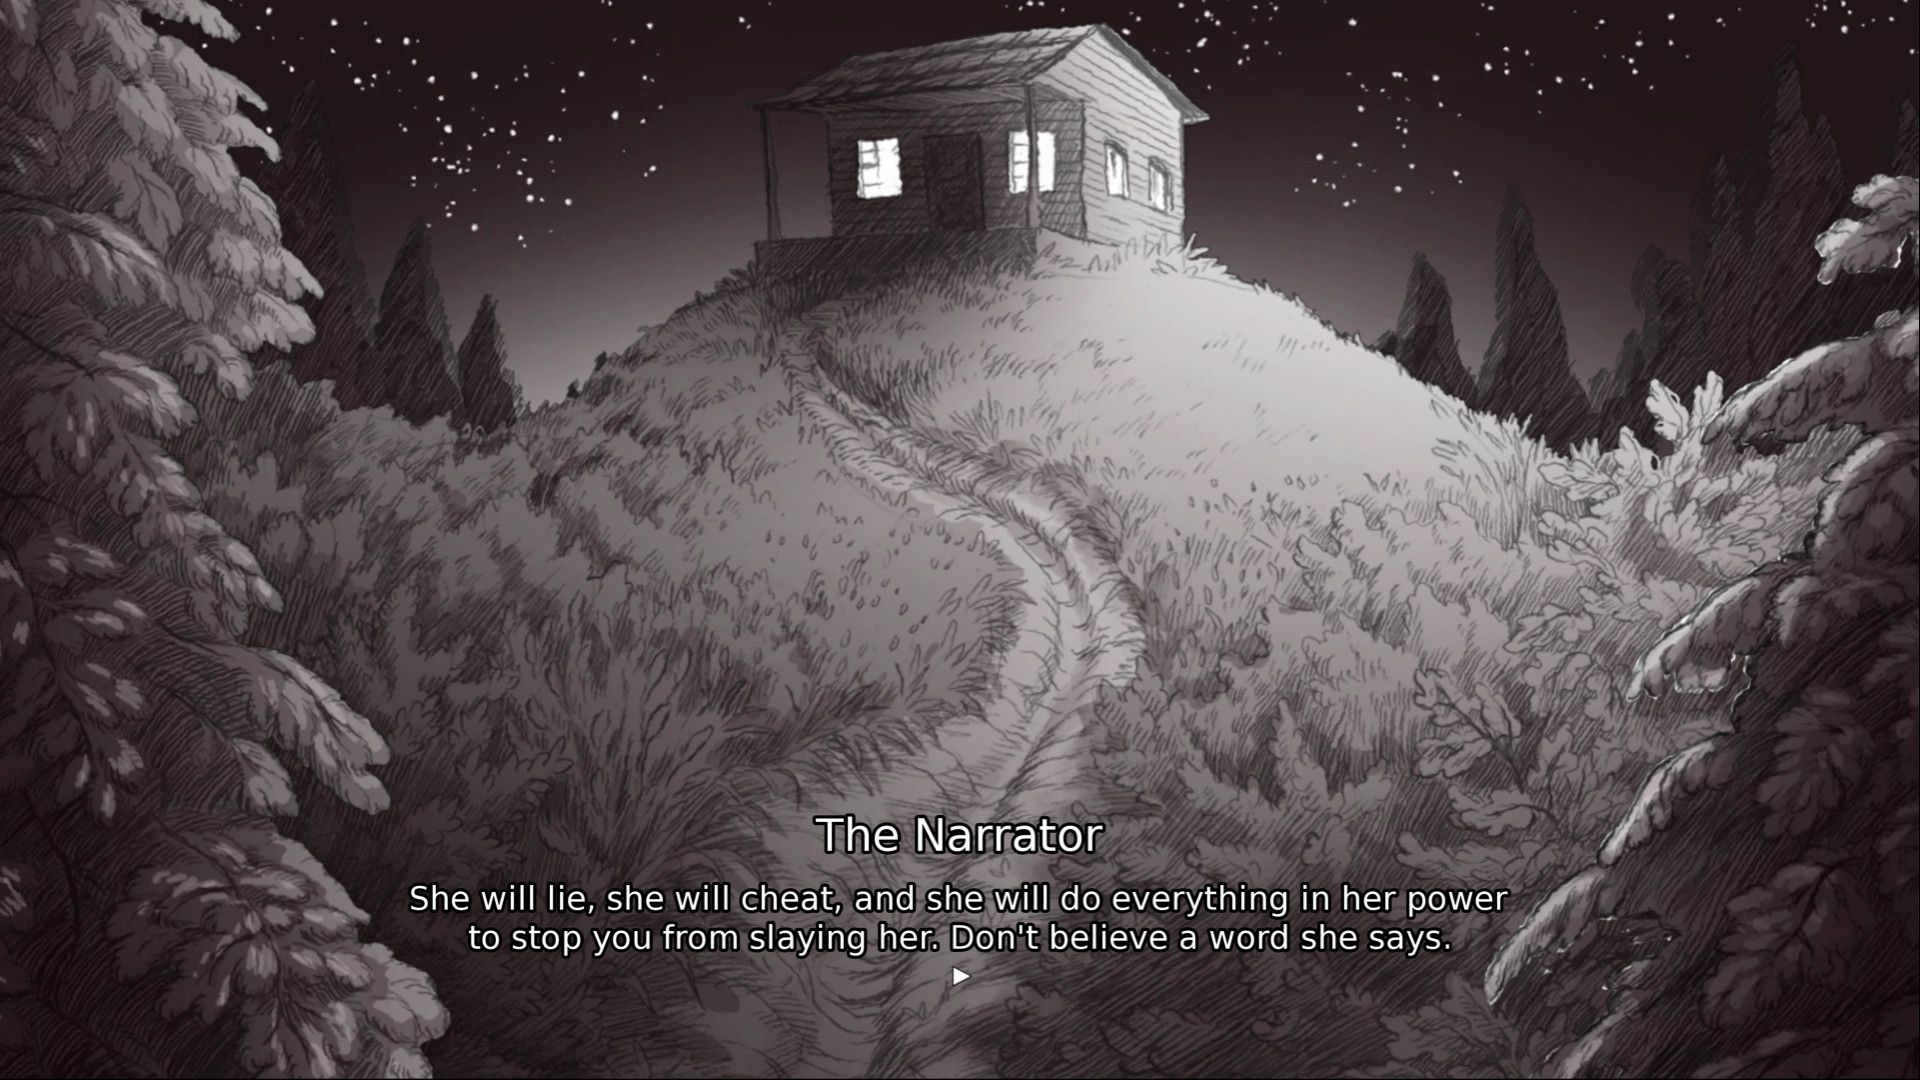 A cabin at night. Text on screen from the Narrator warns that the Princess will do anything to get free.